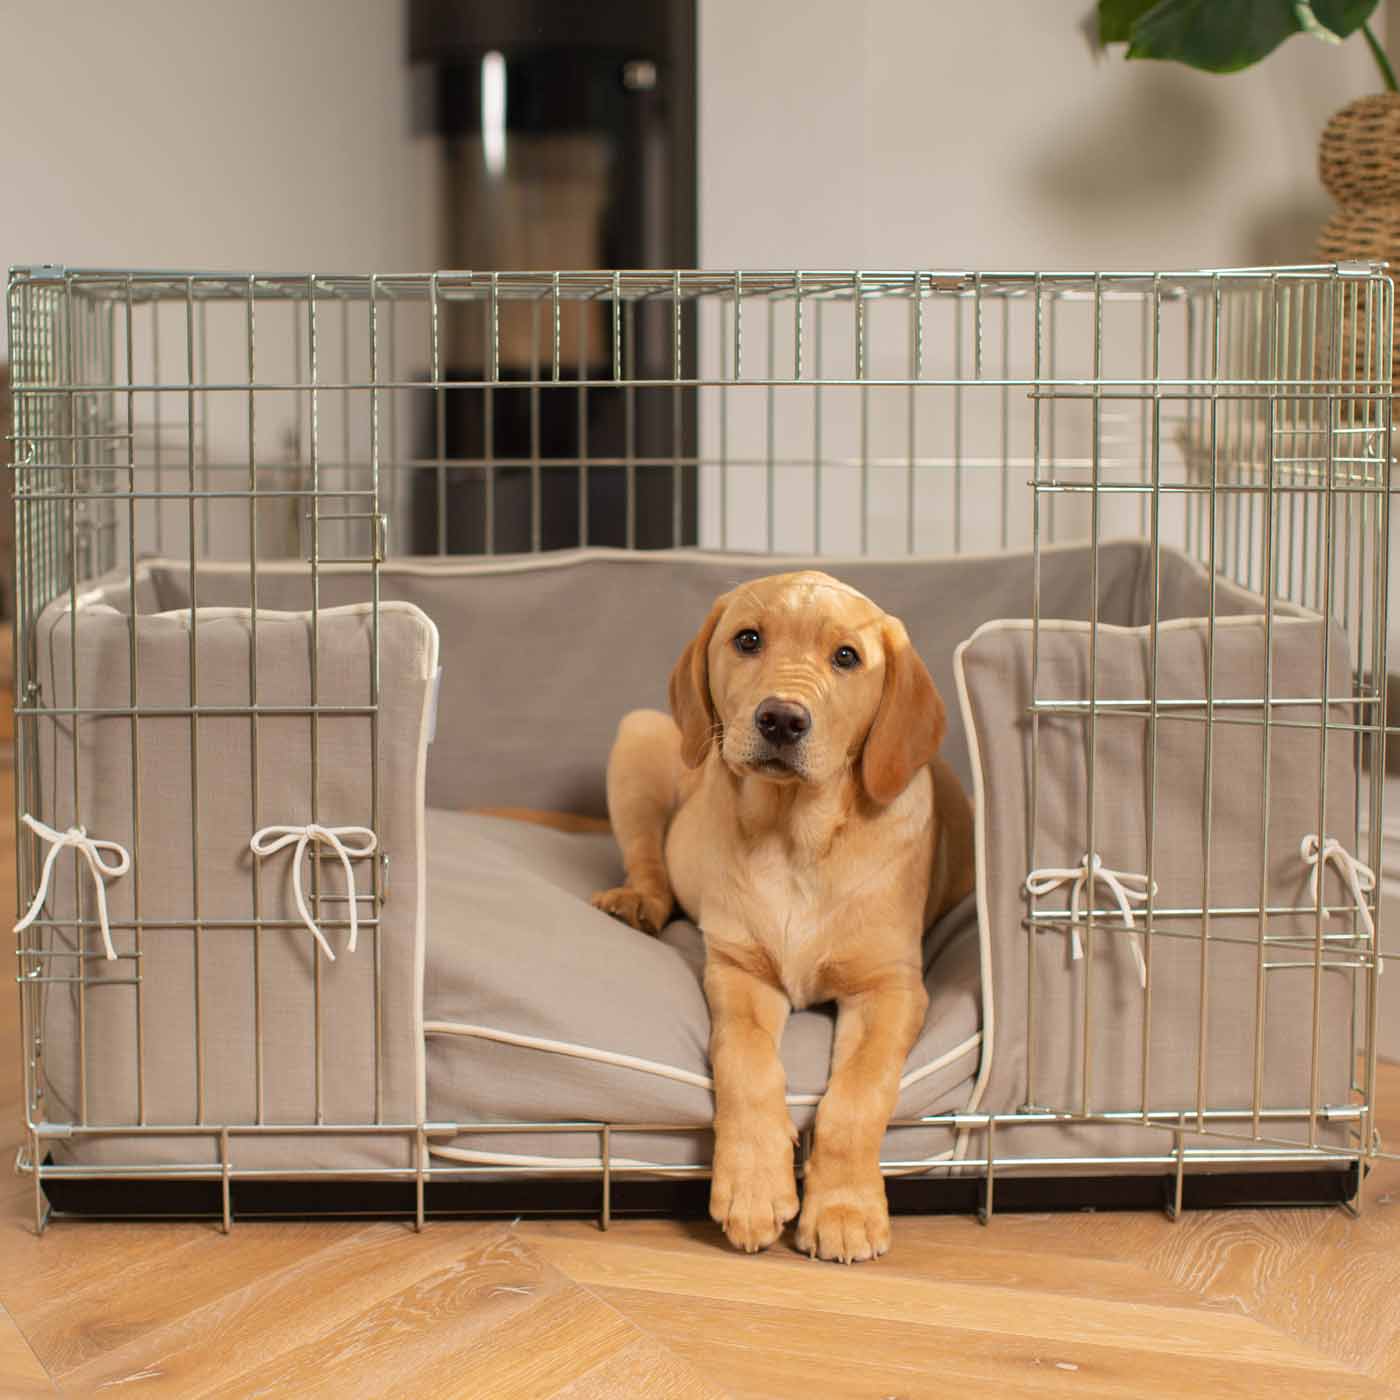 [color:savanna stone] Accessorize your dog cage with our stunning bumper covers, choose from our Savanna collection! Made using luxury fabric for the perfect cage accessory to build the ultimate dog den! Available now in 3 colors and sizes at Lords & Labradors US